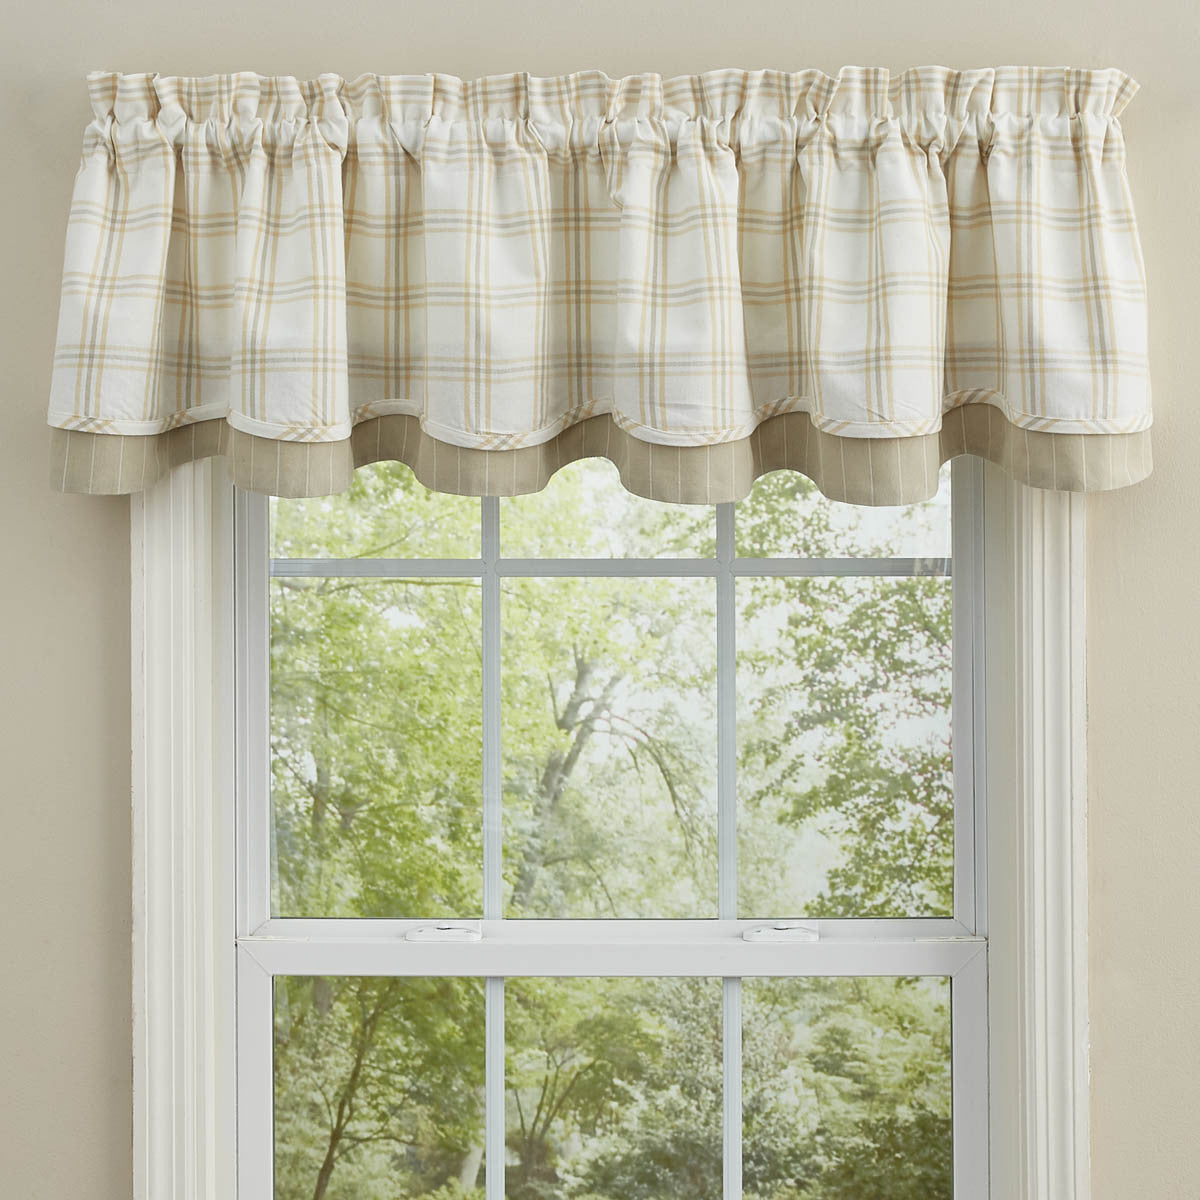 Cocoa Butter Valance - Lined Layered Park Designs